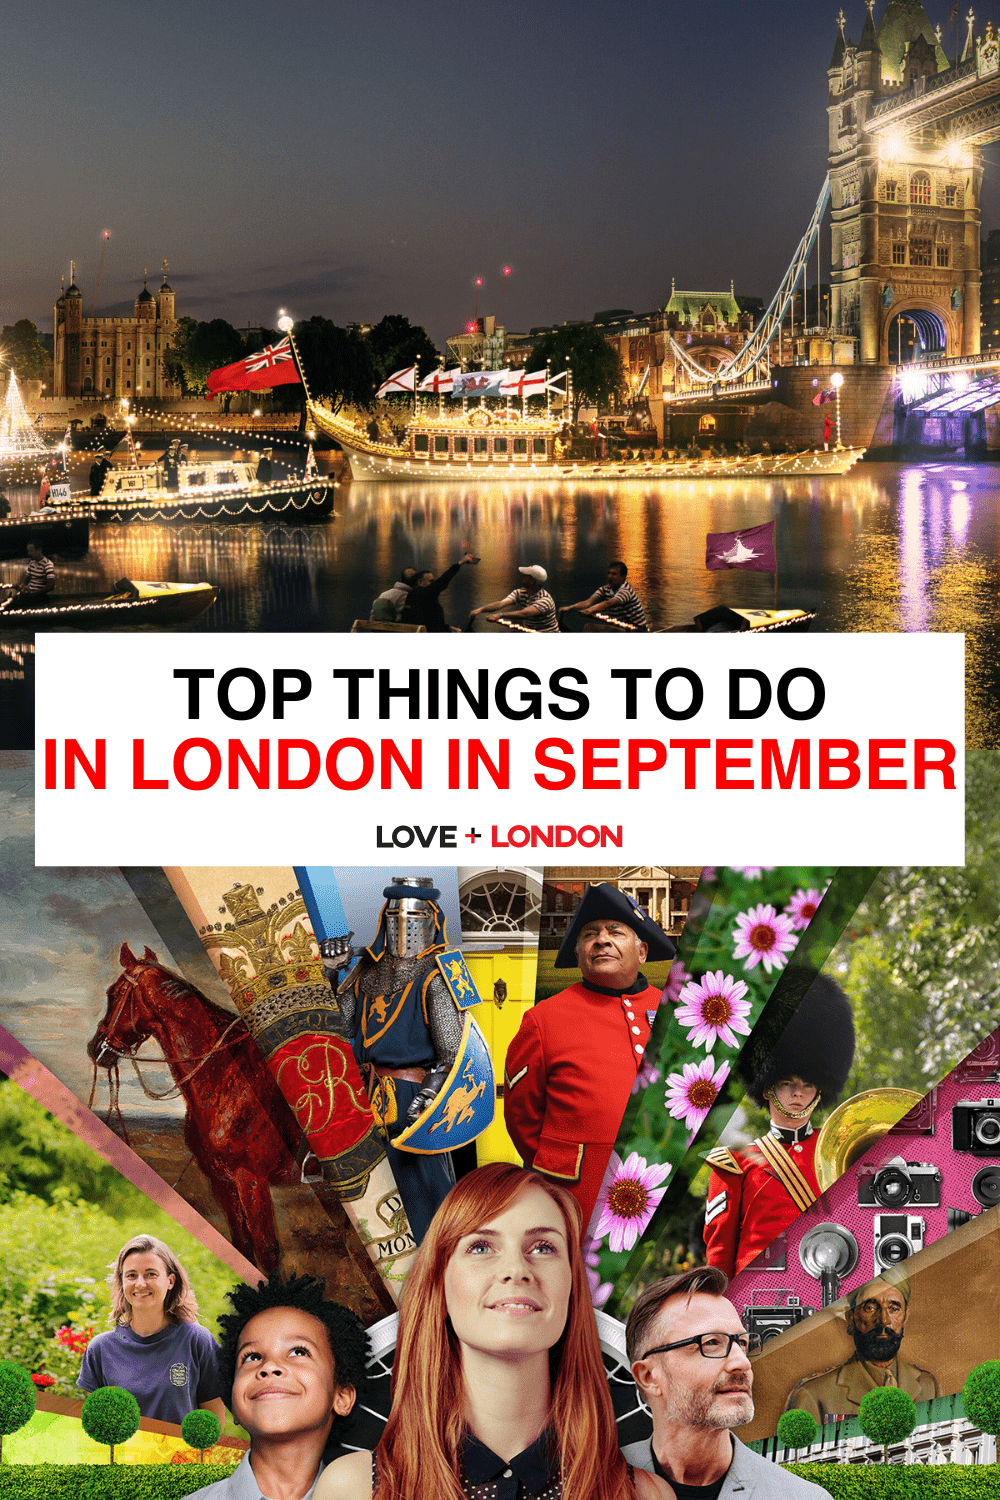 Top Things To Do in London in September 